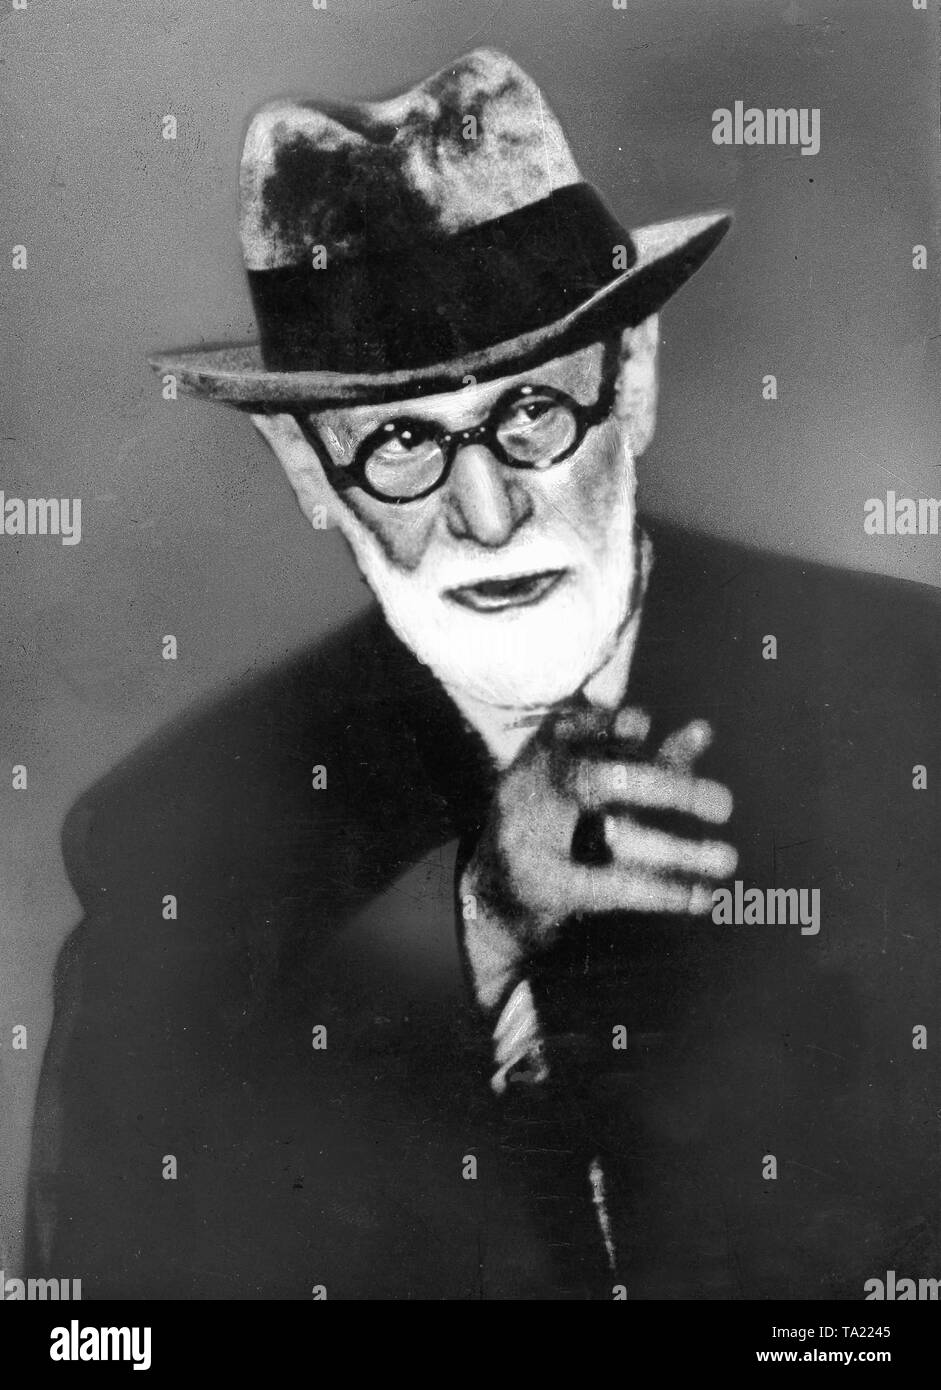 Psychoanalyst speaking Black and White Stock Photos & Images - Alamy